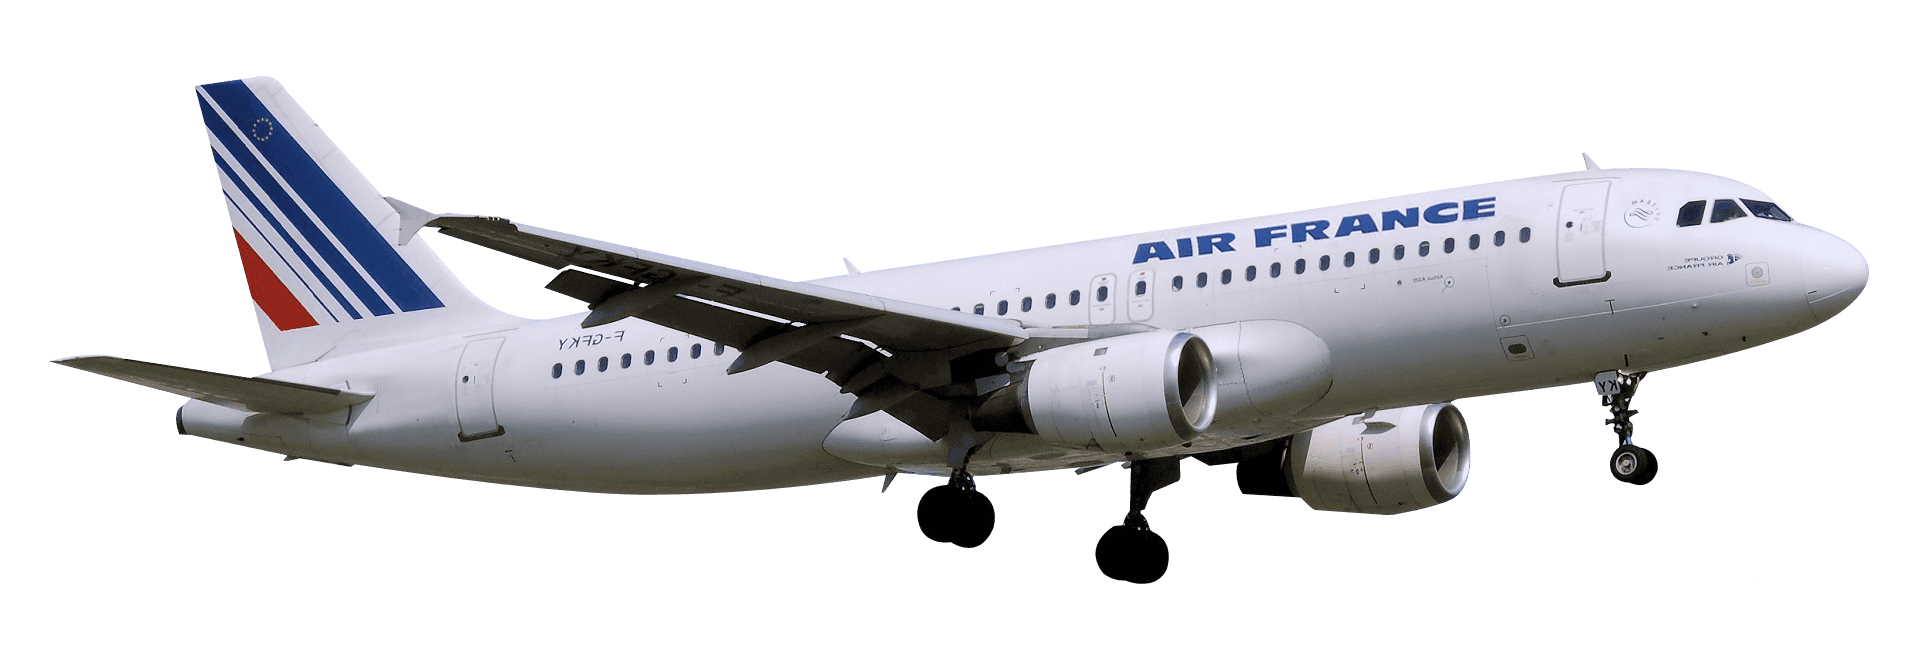 Air France Airbus A320 Midflight PNG image